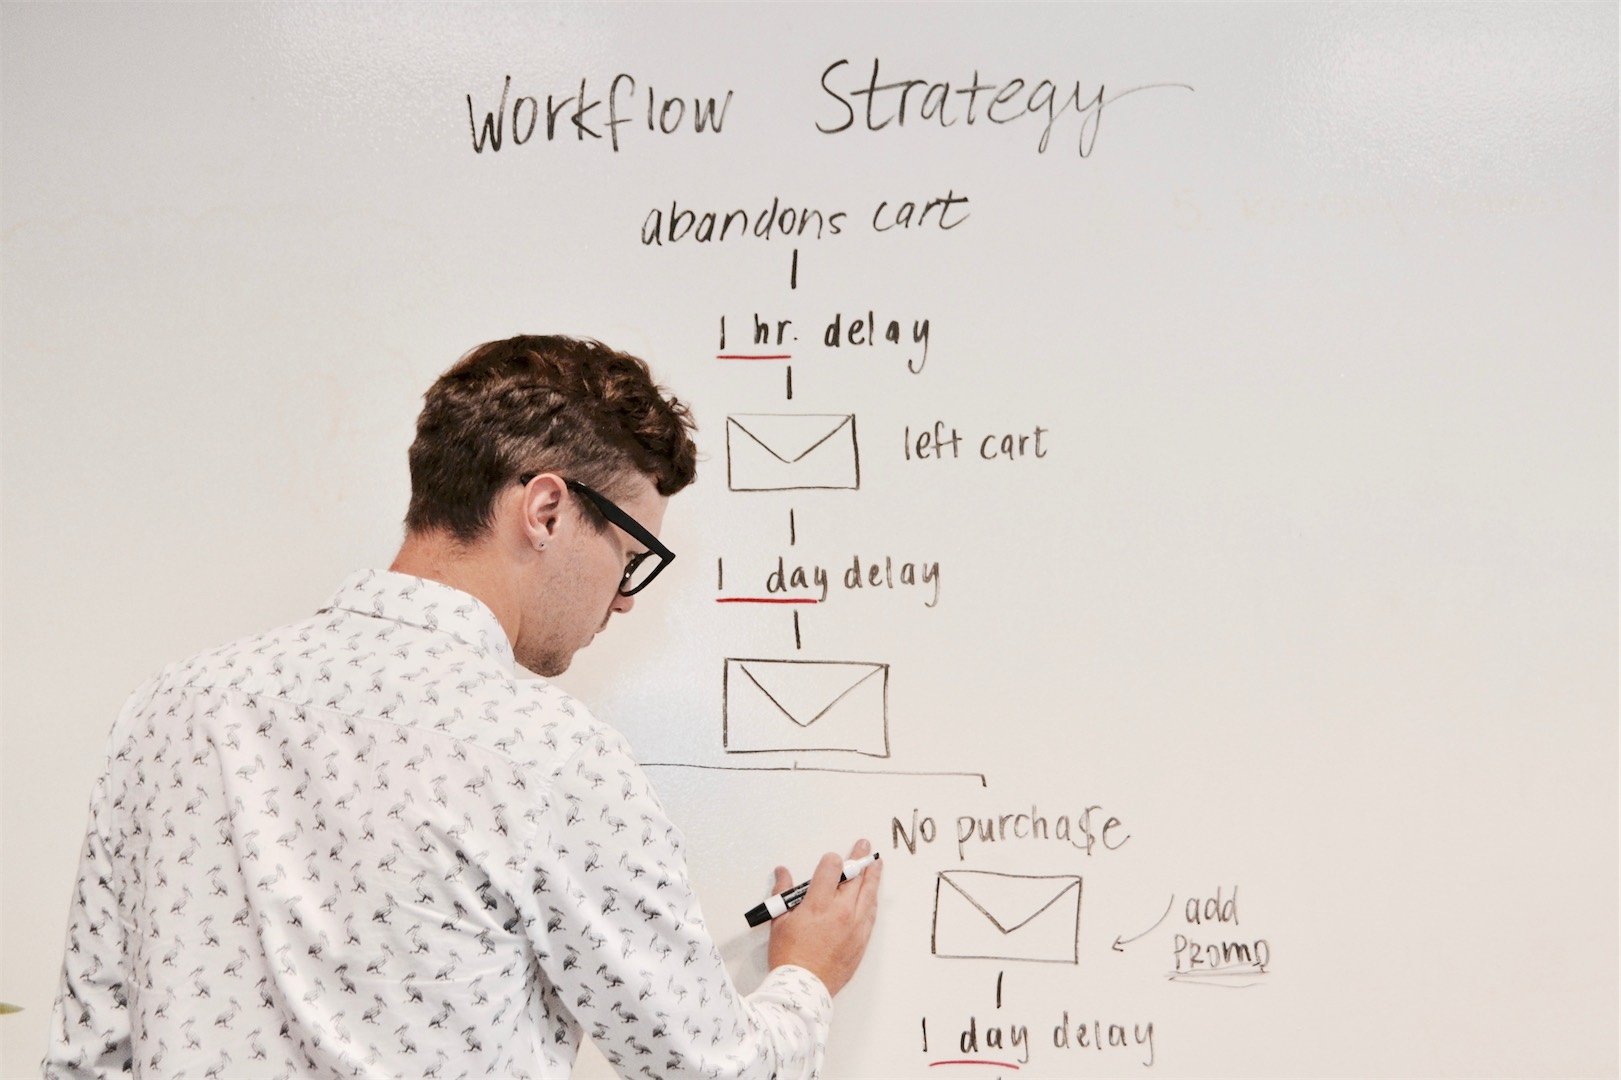 Guy brainstorming a workflow on white board